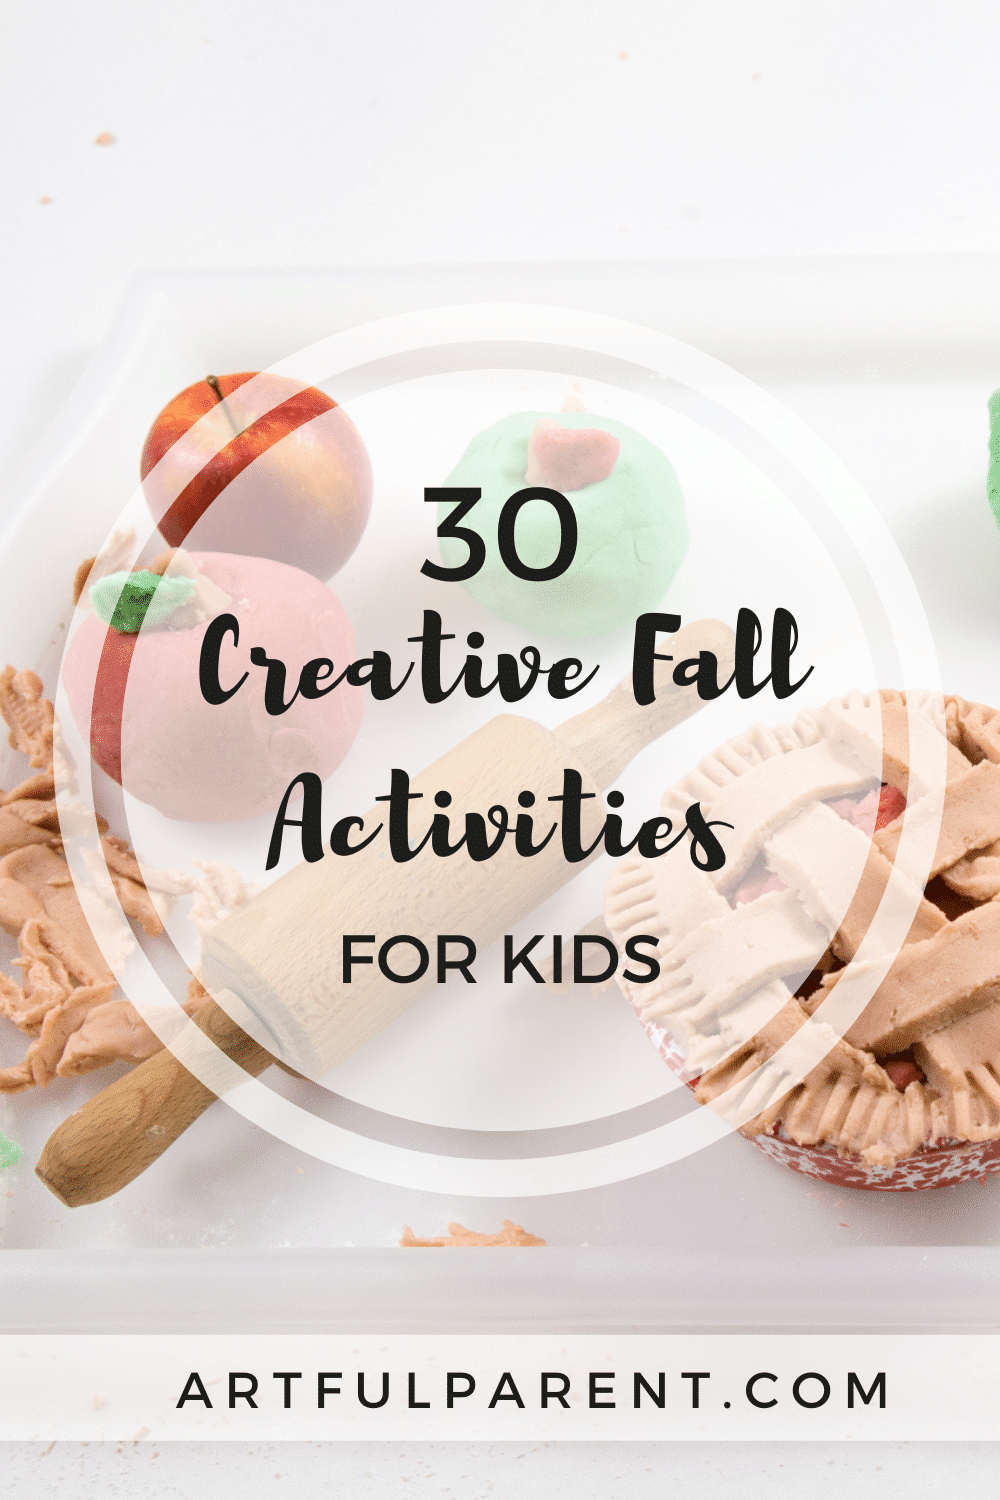 30 Creative Fall Activities for Kids (+ Free Printable!)